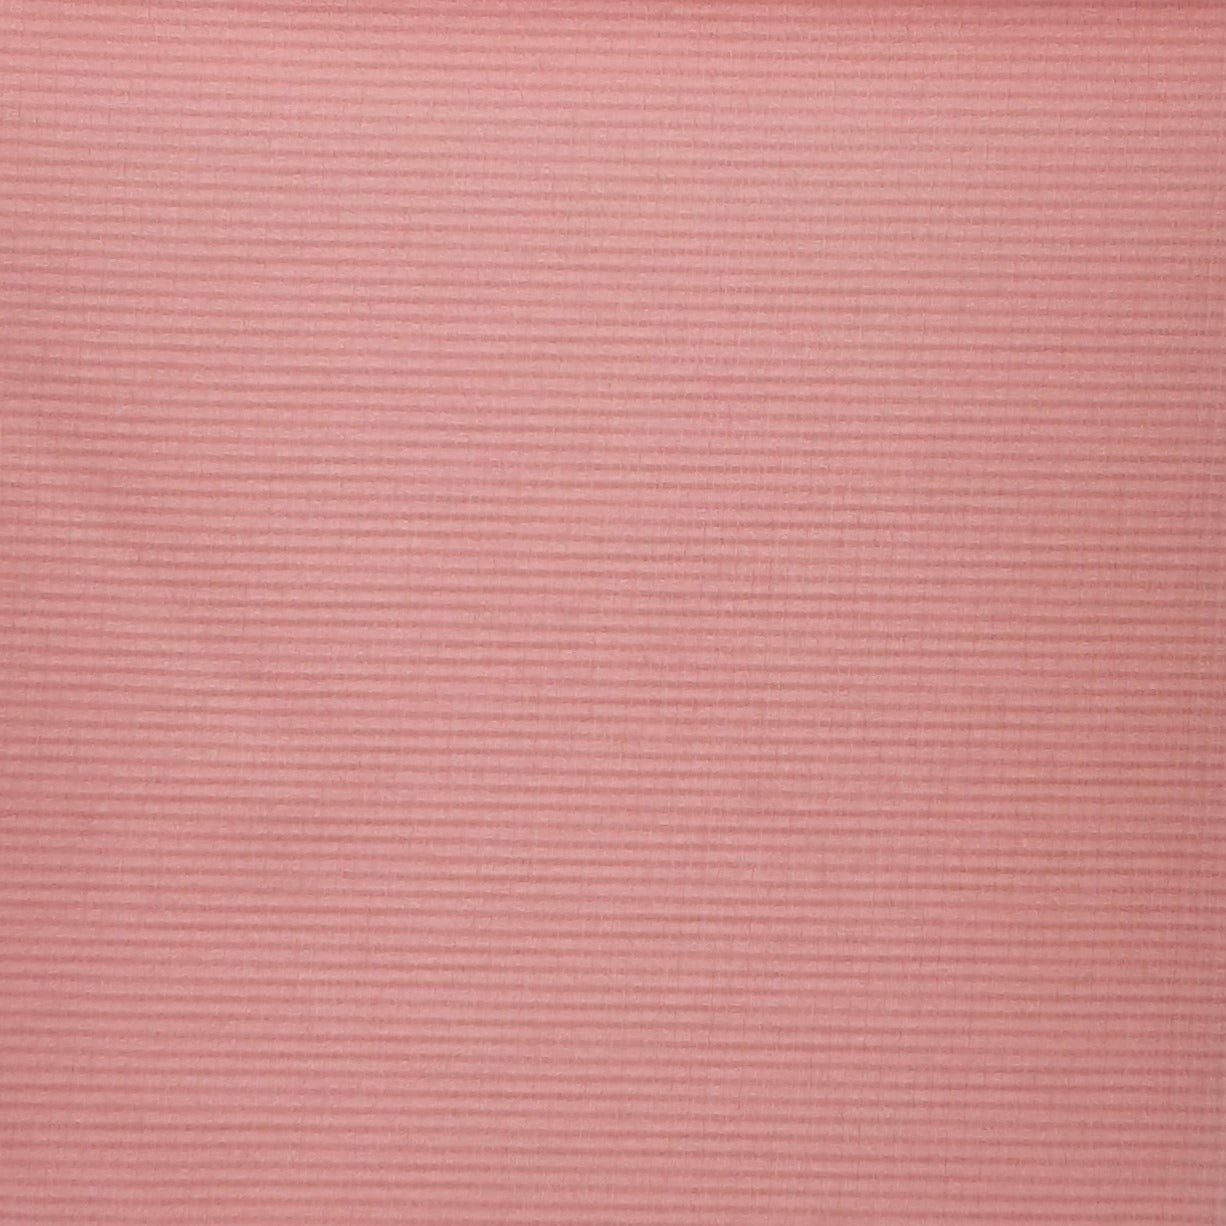 PINK KNT3935 POLY RIB SOLID 54/56"